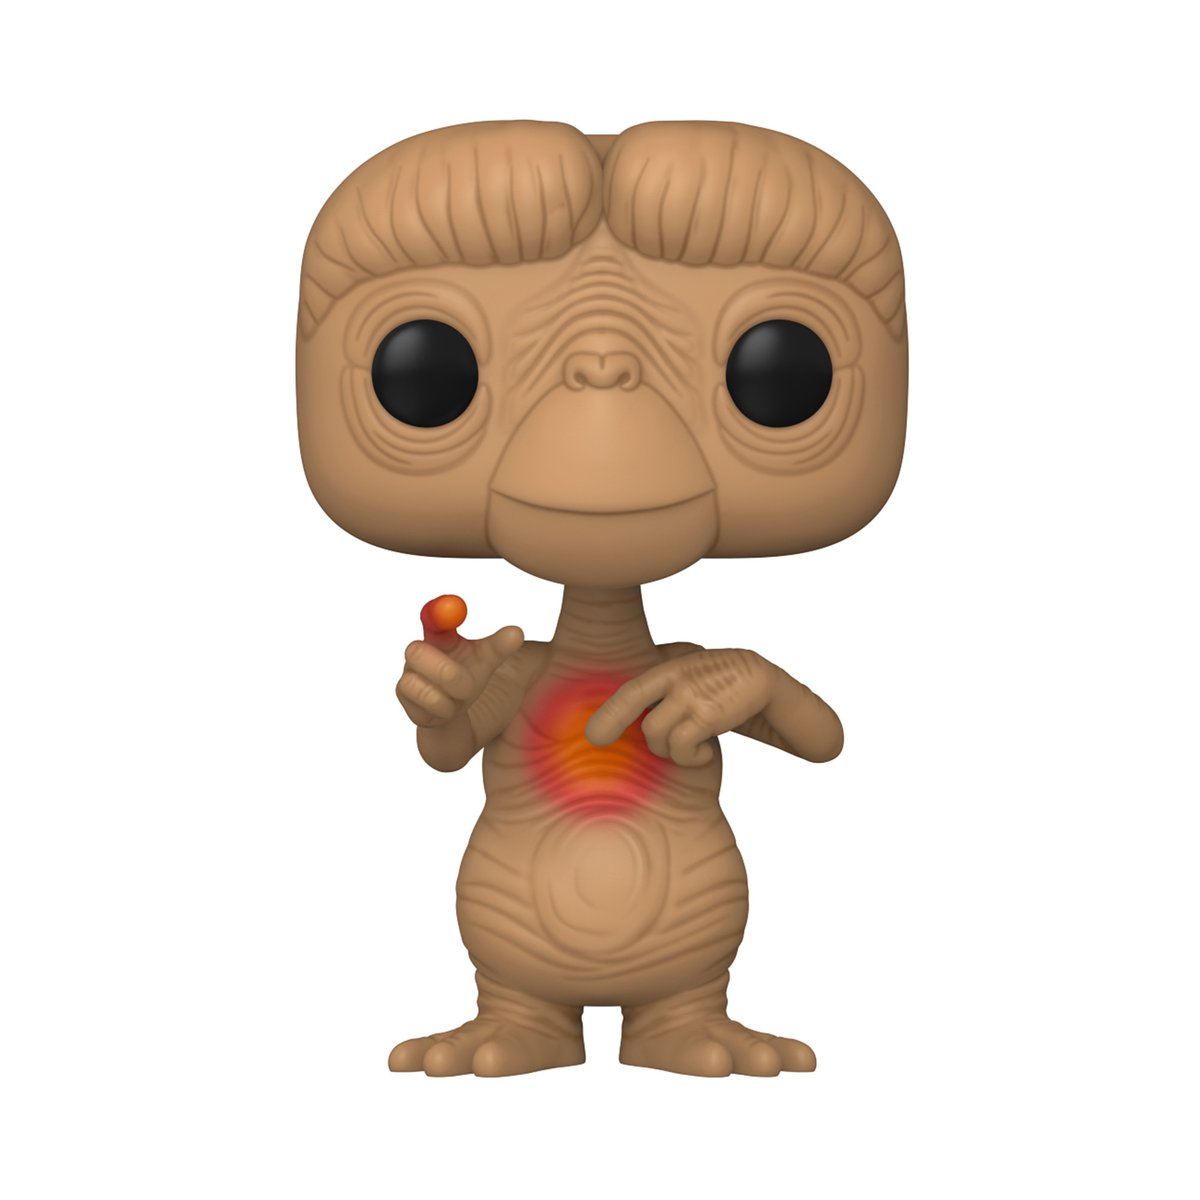 RT and follow @OriginalFunko for the chance to WIN the @Target exclusive Glow in the Dark E.T. With Glowing Heart POP! #Funko #FunkoPOP #Giveaway